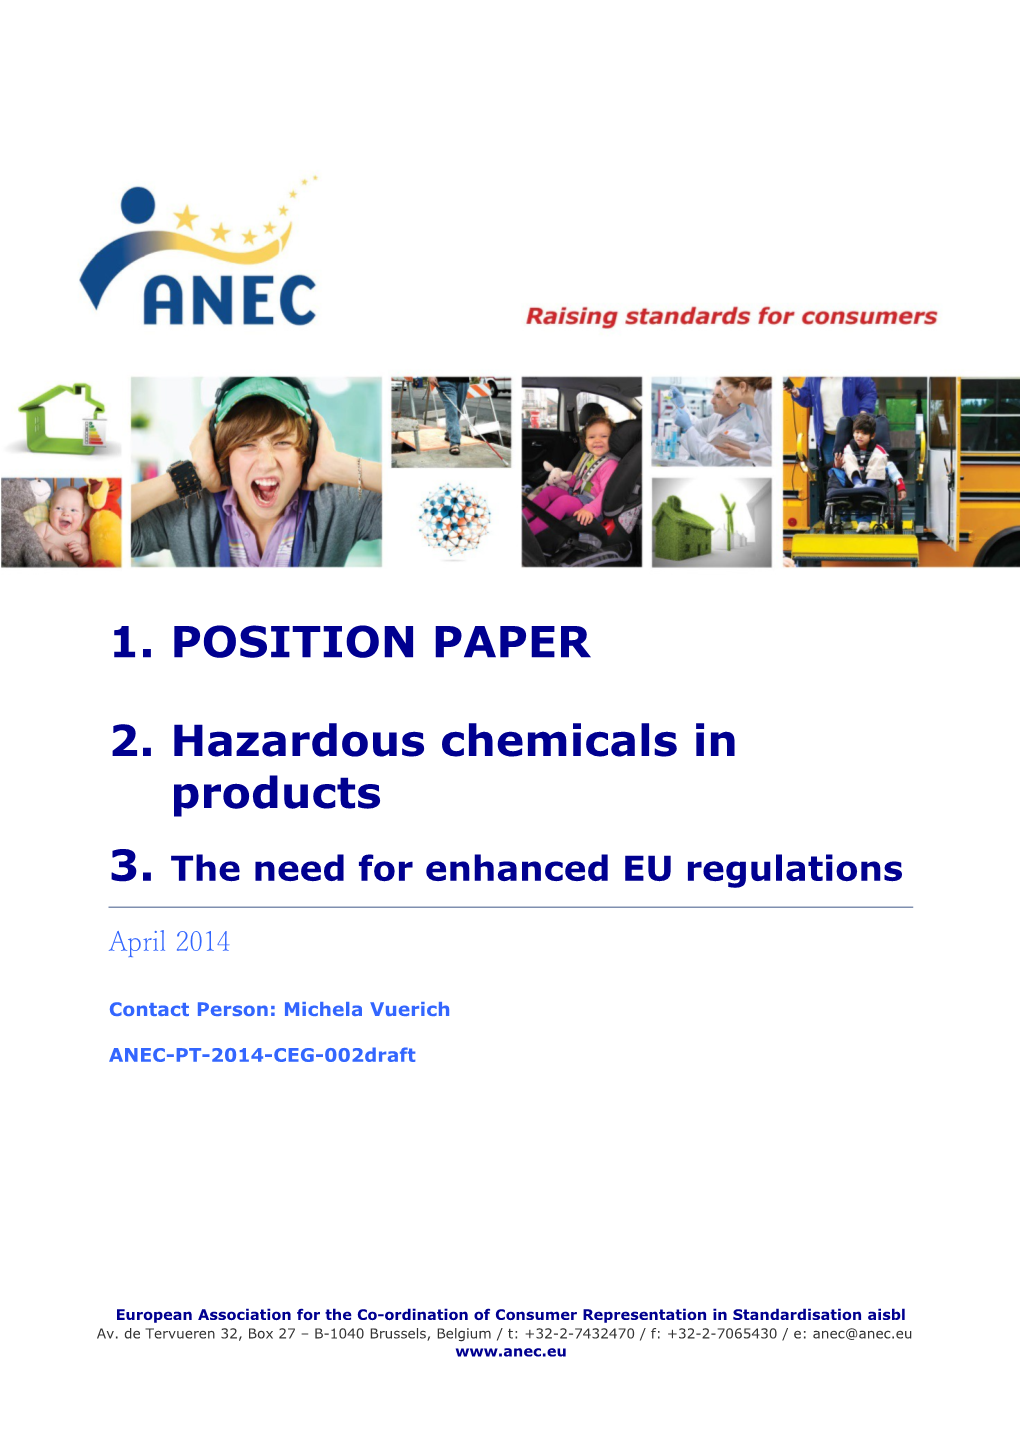 Hazardous Chemicals in Products - the Need for Enhanced EU Regulations